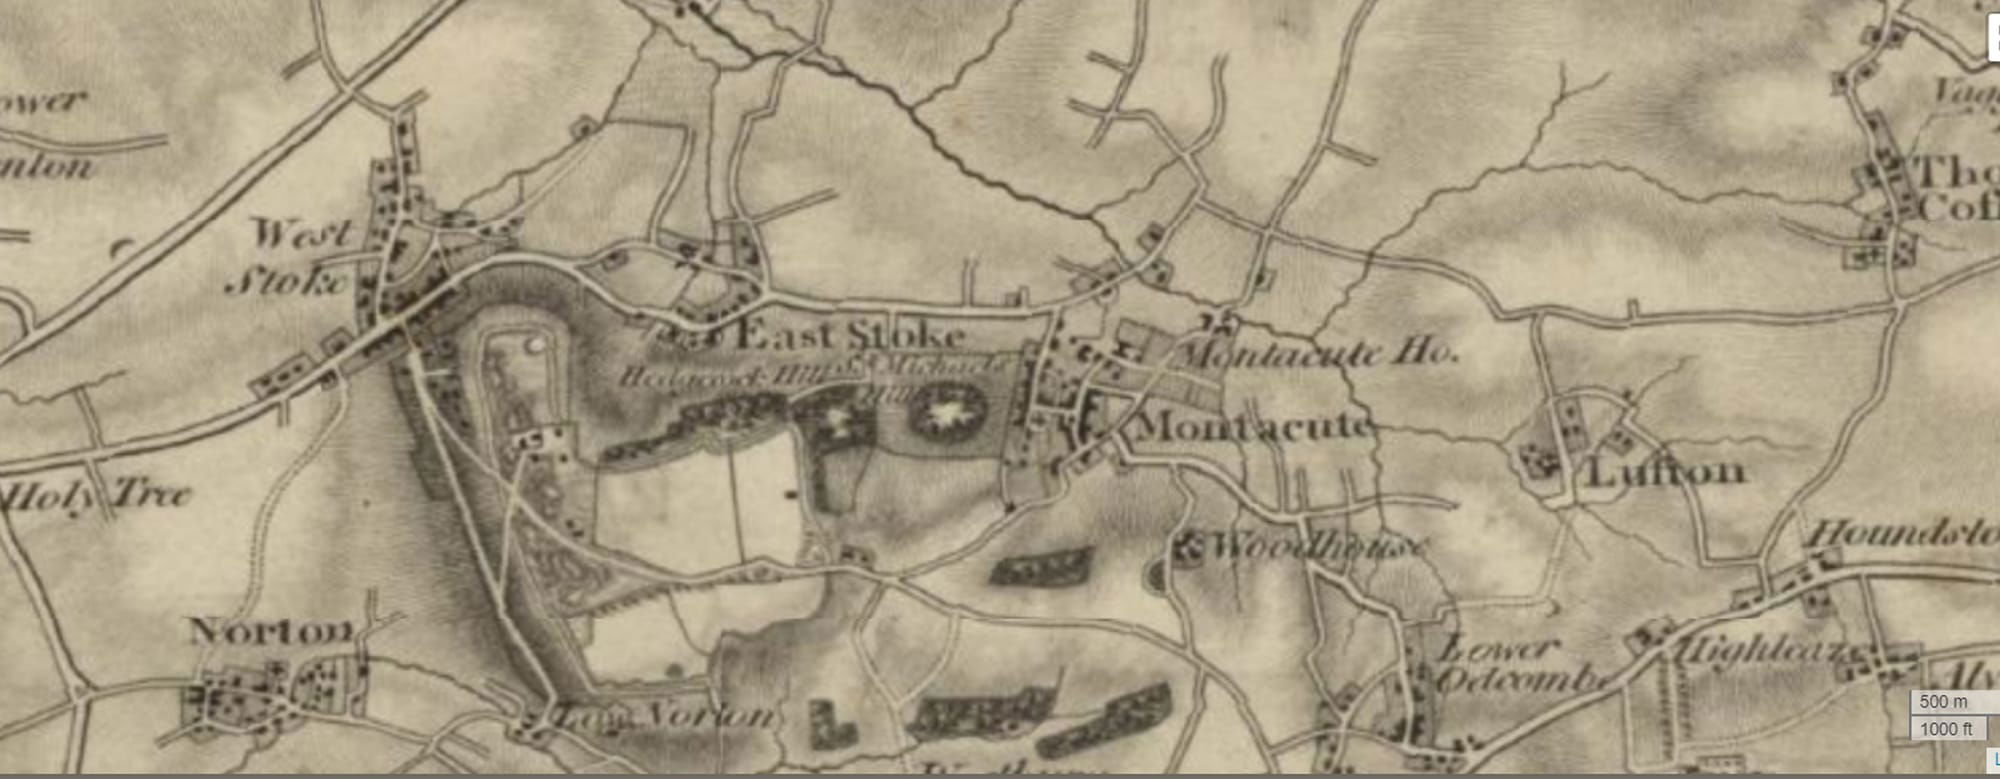 Faded sepia map of Montacute illustrating the road across the park that is now out of use as described in the text